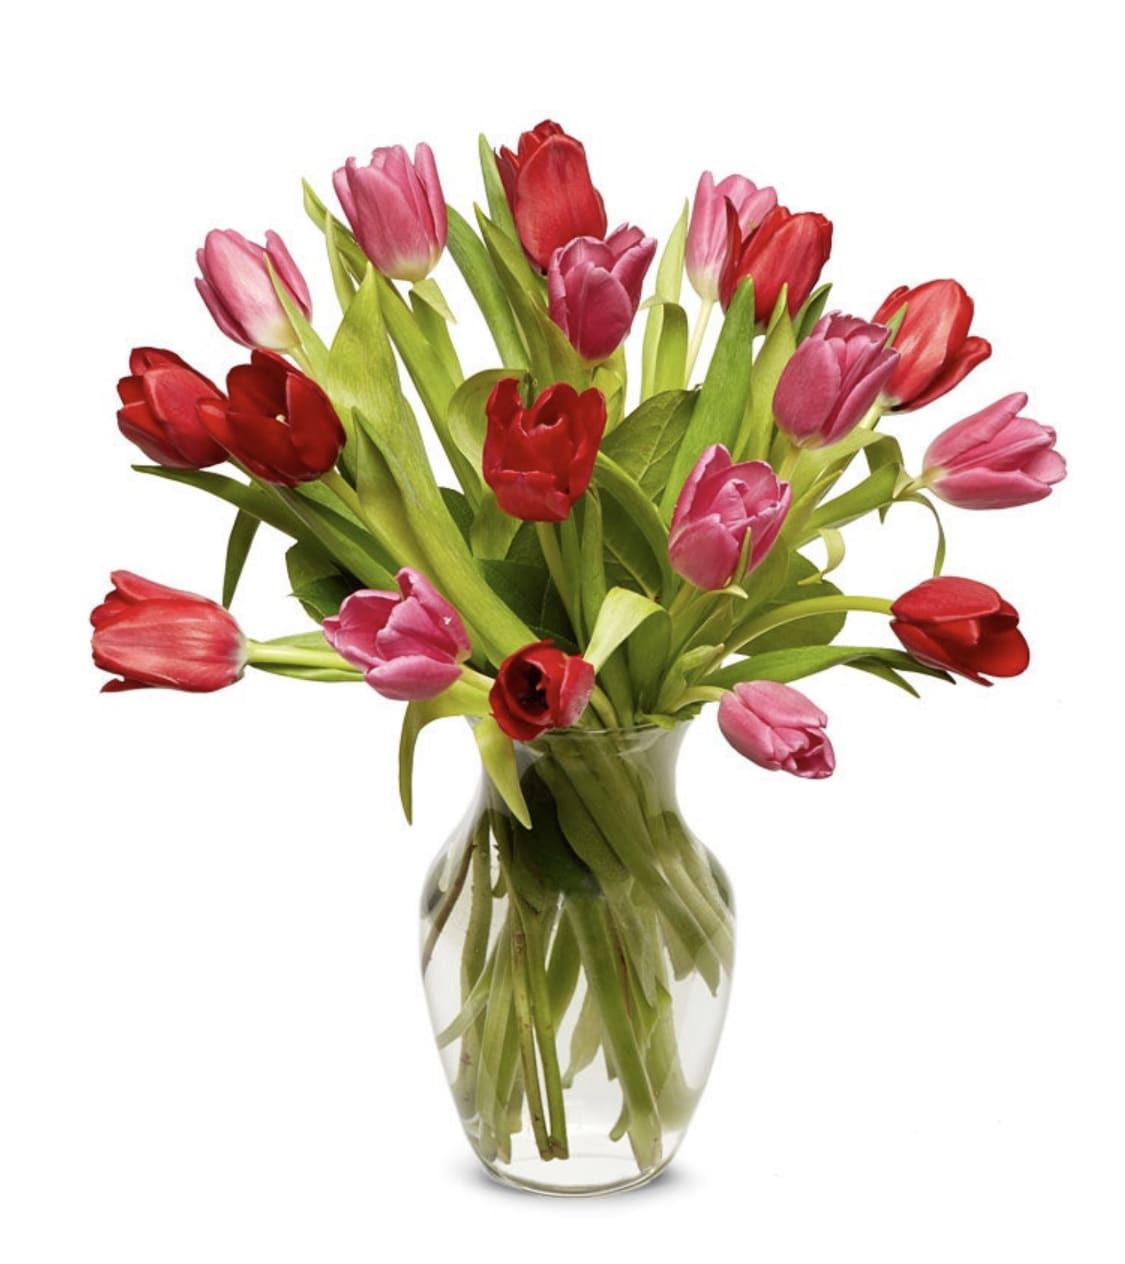 In Love With Tulips - The combination of pink and red tulips evoke the thoughts of perfect happiness and love. Send this captivating assortment of fresh cut tulips and watch their eyes light up with affection!  